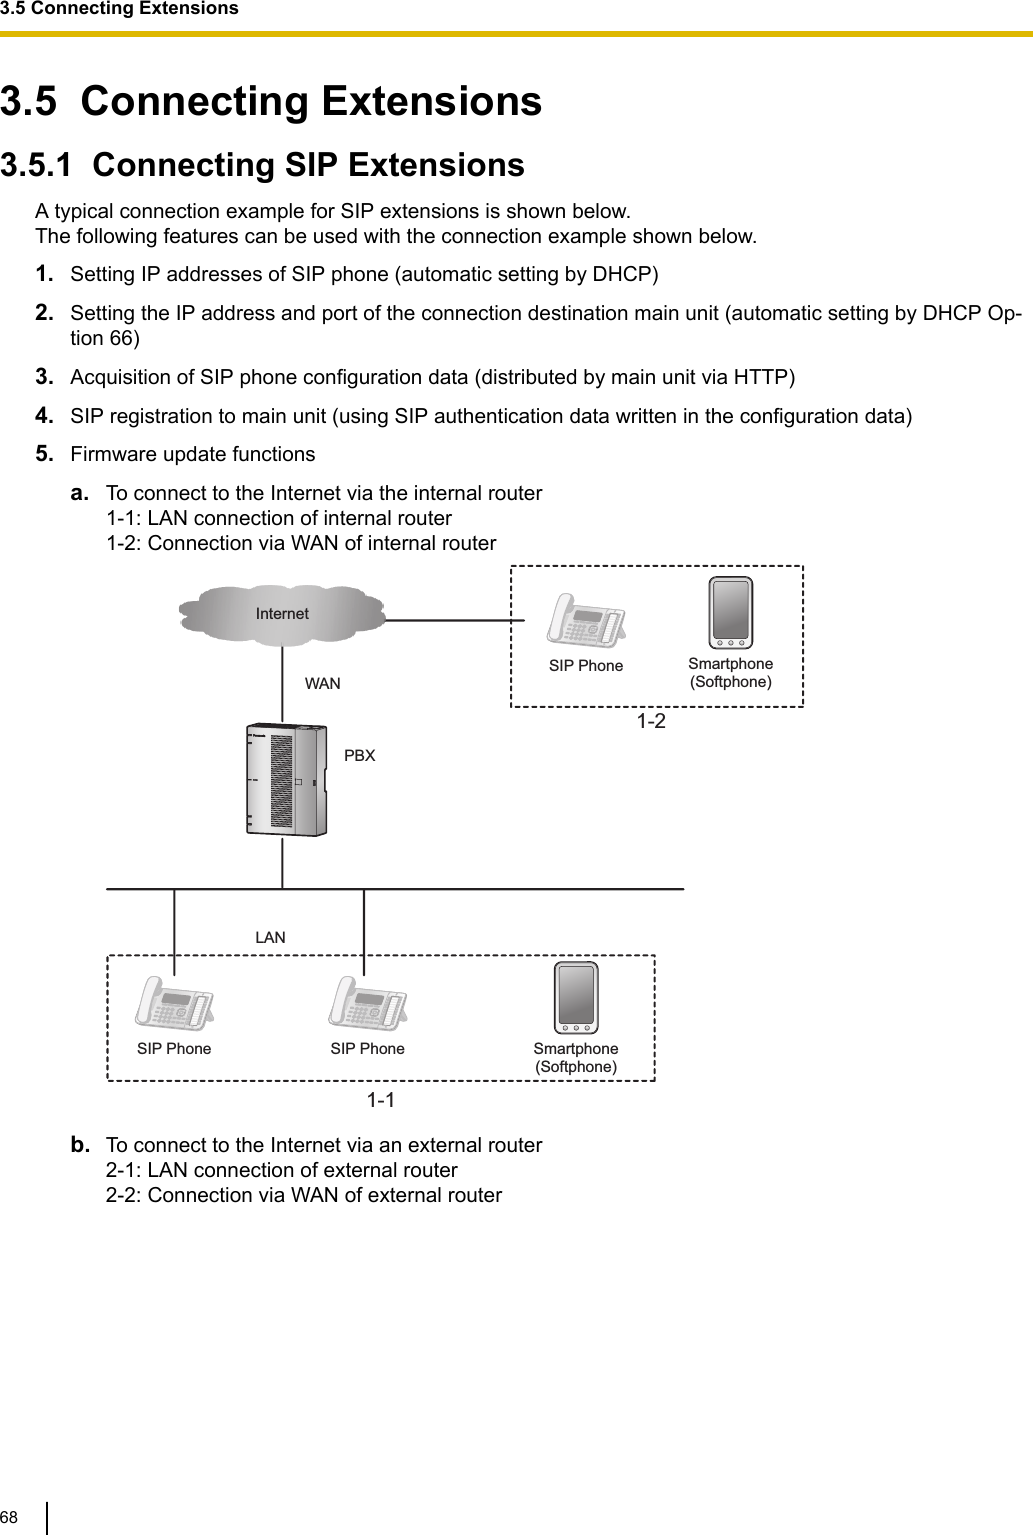 3.5  Connecting Extensions3.5.1  Connecting SIP ExtensionsA typical connection example for SIP extensions is shown below.The following features can be used with the connection example shown below.1. Setting IP addresses of SIP phone (automatic setting by DHCP)2. Setting the IP address and port of the connection destination main unit (automatic setting by DHCP Op-tion 66)3. Acquisition of SIP phone configuration data (distributed by main unit via HTTP)4. SIP registration to main unit (using SIP authentication data written in the configuration data)5. Firmware update functionsa. To connect to the Internet via the internal router1-1: LAN connection of internal router1-2: Connection via WAN of internal routerPBXLANInternetWAN1-1SIP Phone1-2Smartphone(Softphone)SIP PhoneSIP Phone Smartphone(Softphone)b. To connect to the Internet via an external router2-1: LAN connection of external router2-2: Connection via WAN of external router3.5 Connecting Extensions68